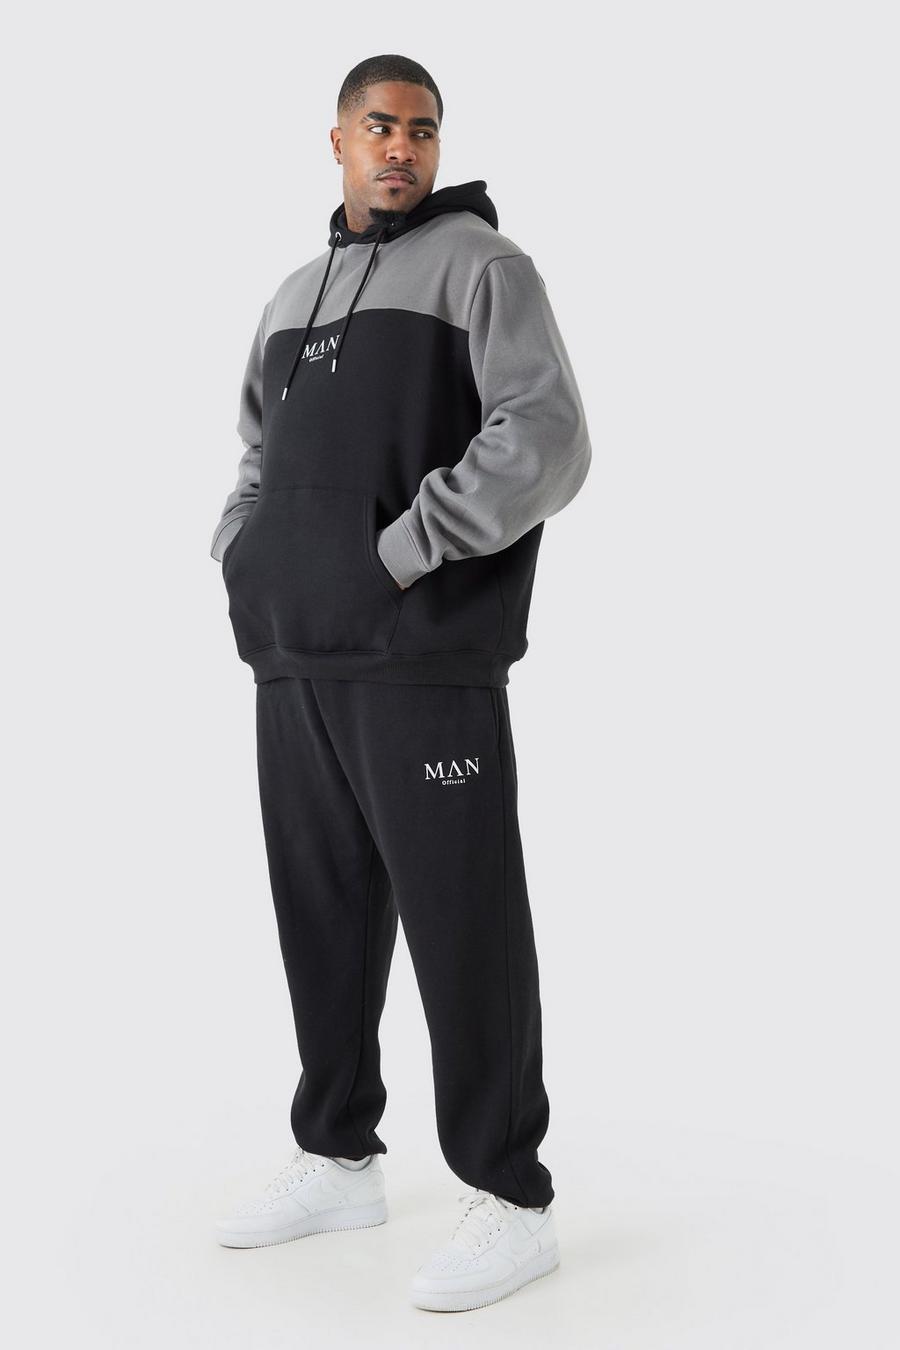 HOSTINGG Men's Tracksuits Big and Tall Mens Sweatsuit 2 Piece